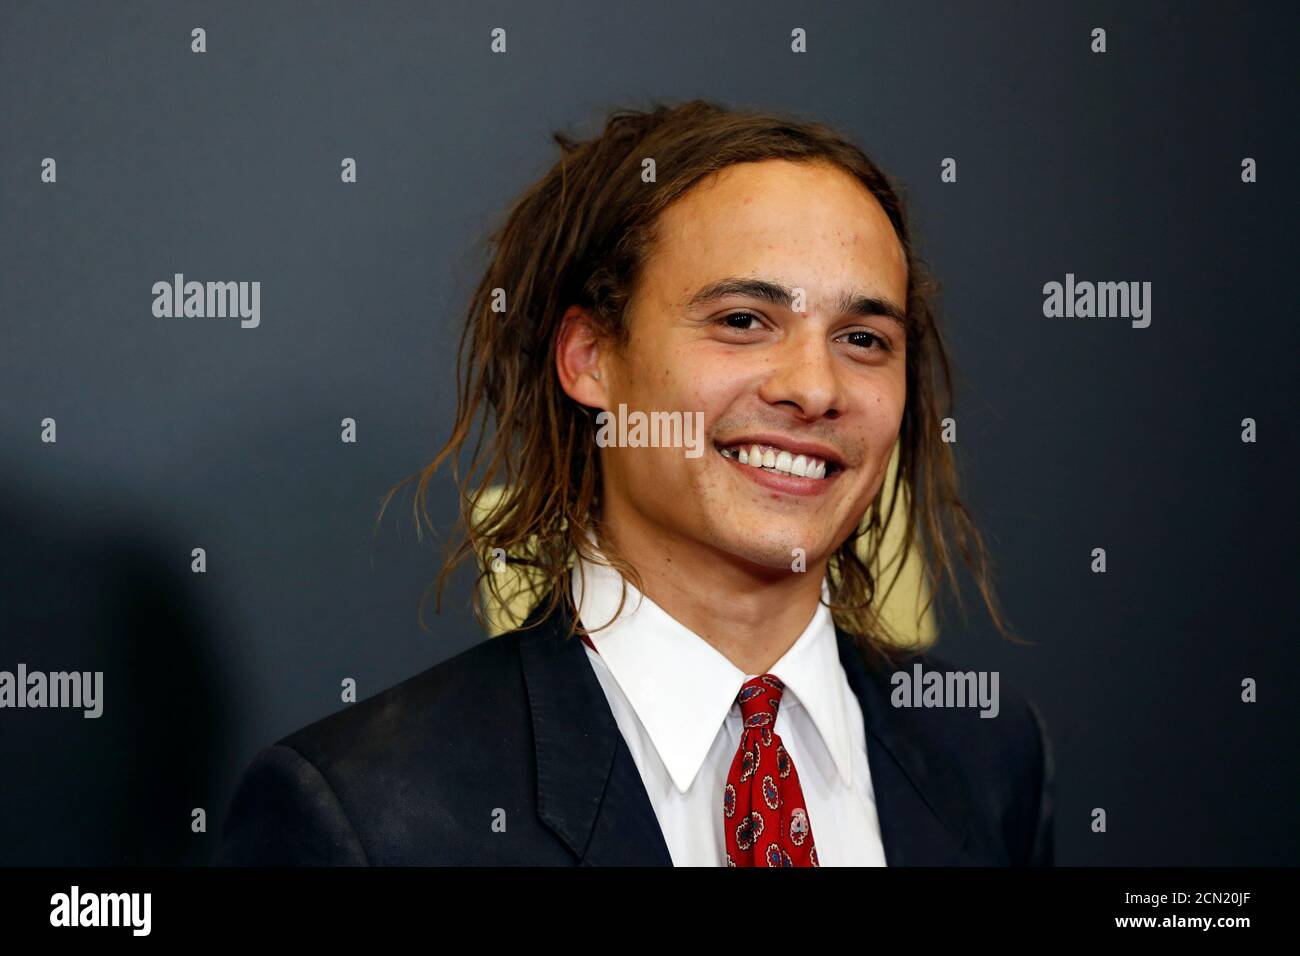 Actor Frank Dillane arrives at the premiere of season 2 of the TV show "Fear  The Walking Dead" at the Cinemark Playa Vista Theatre in Los Angeles,  California March 29, 2016. REUTERS/Patrick